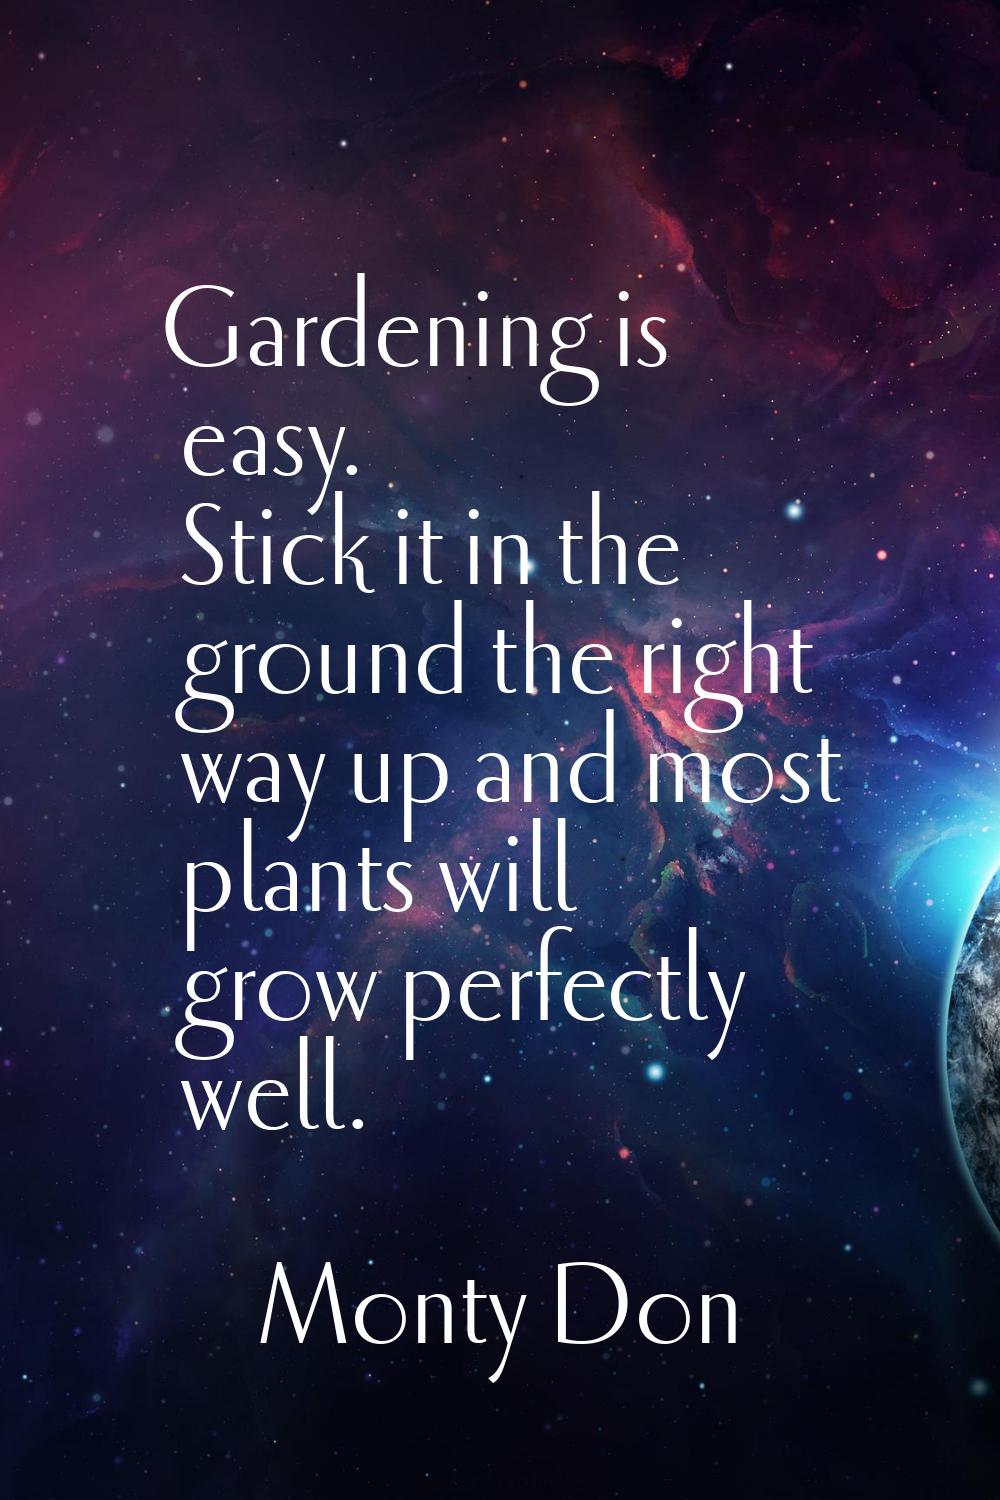 Gardening is easy. Stick it in the ground the right way up and most plants will grow perfectly well